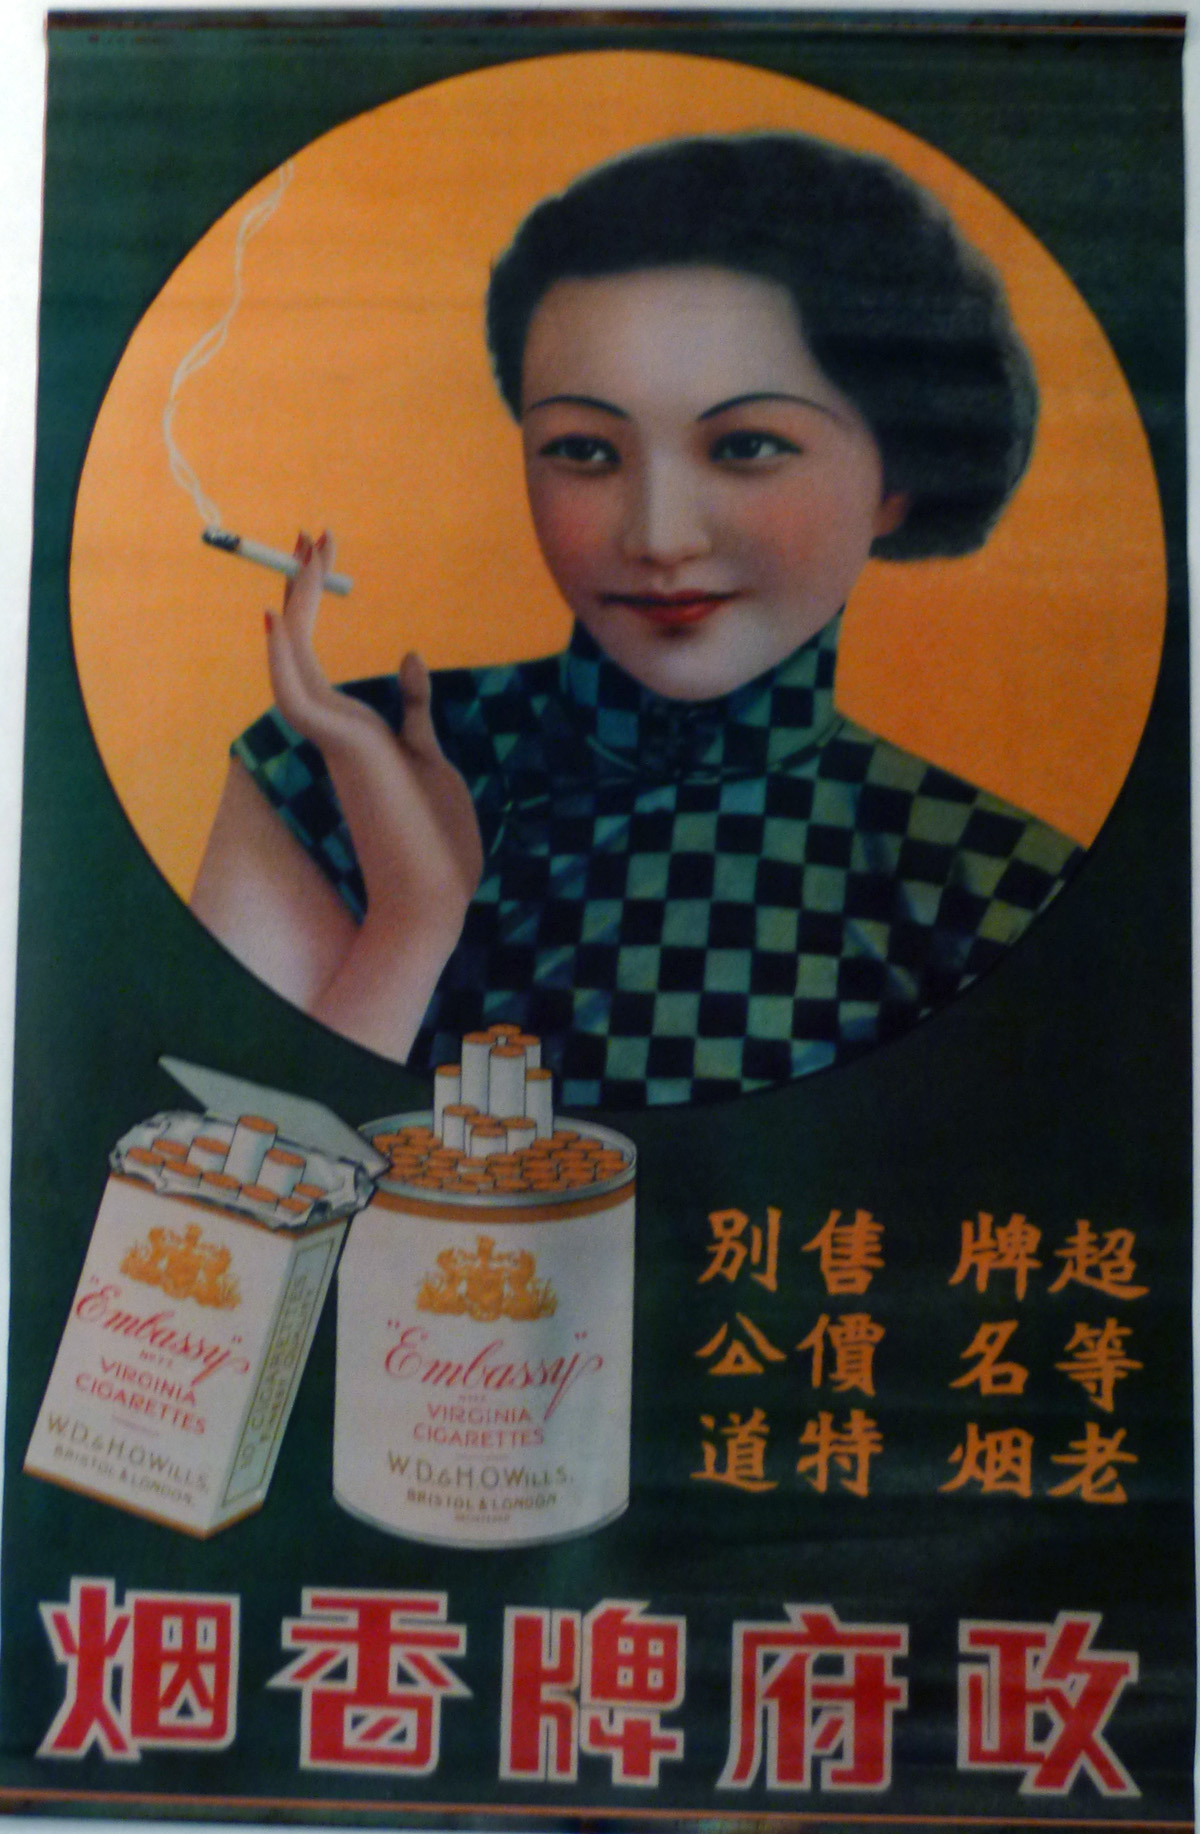 Image for "Embassy Cigarettess"